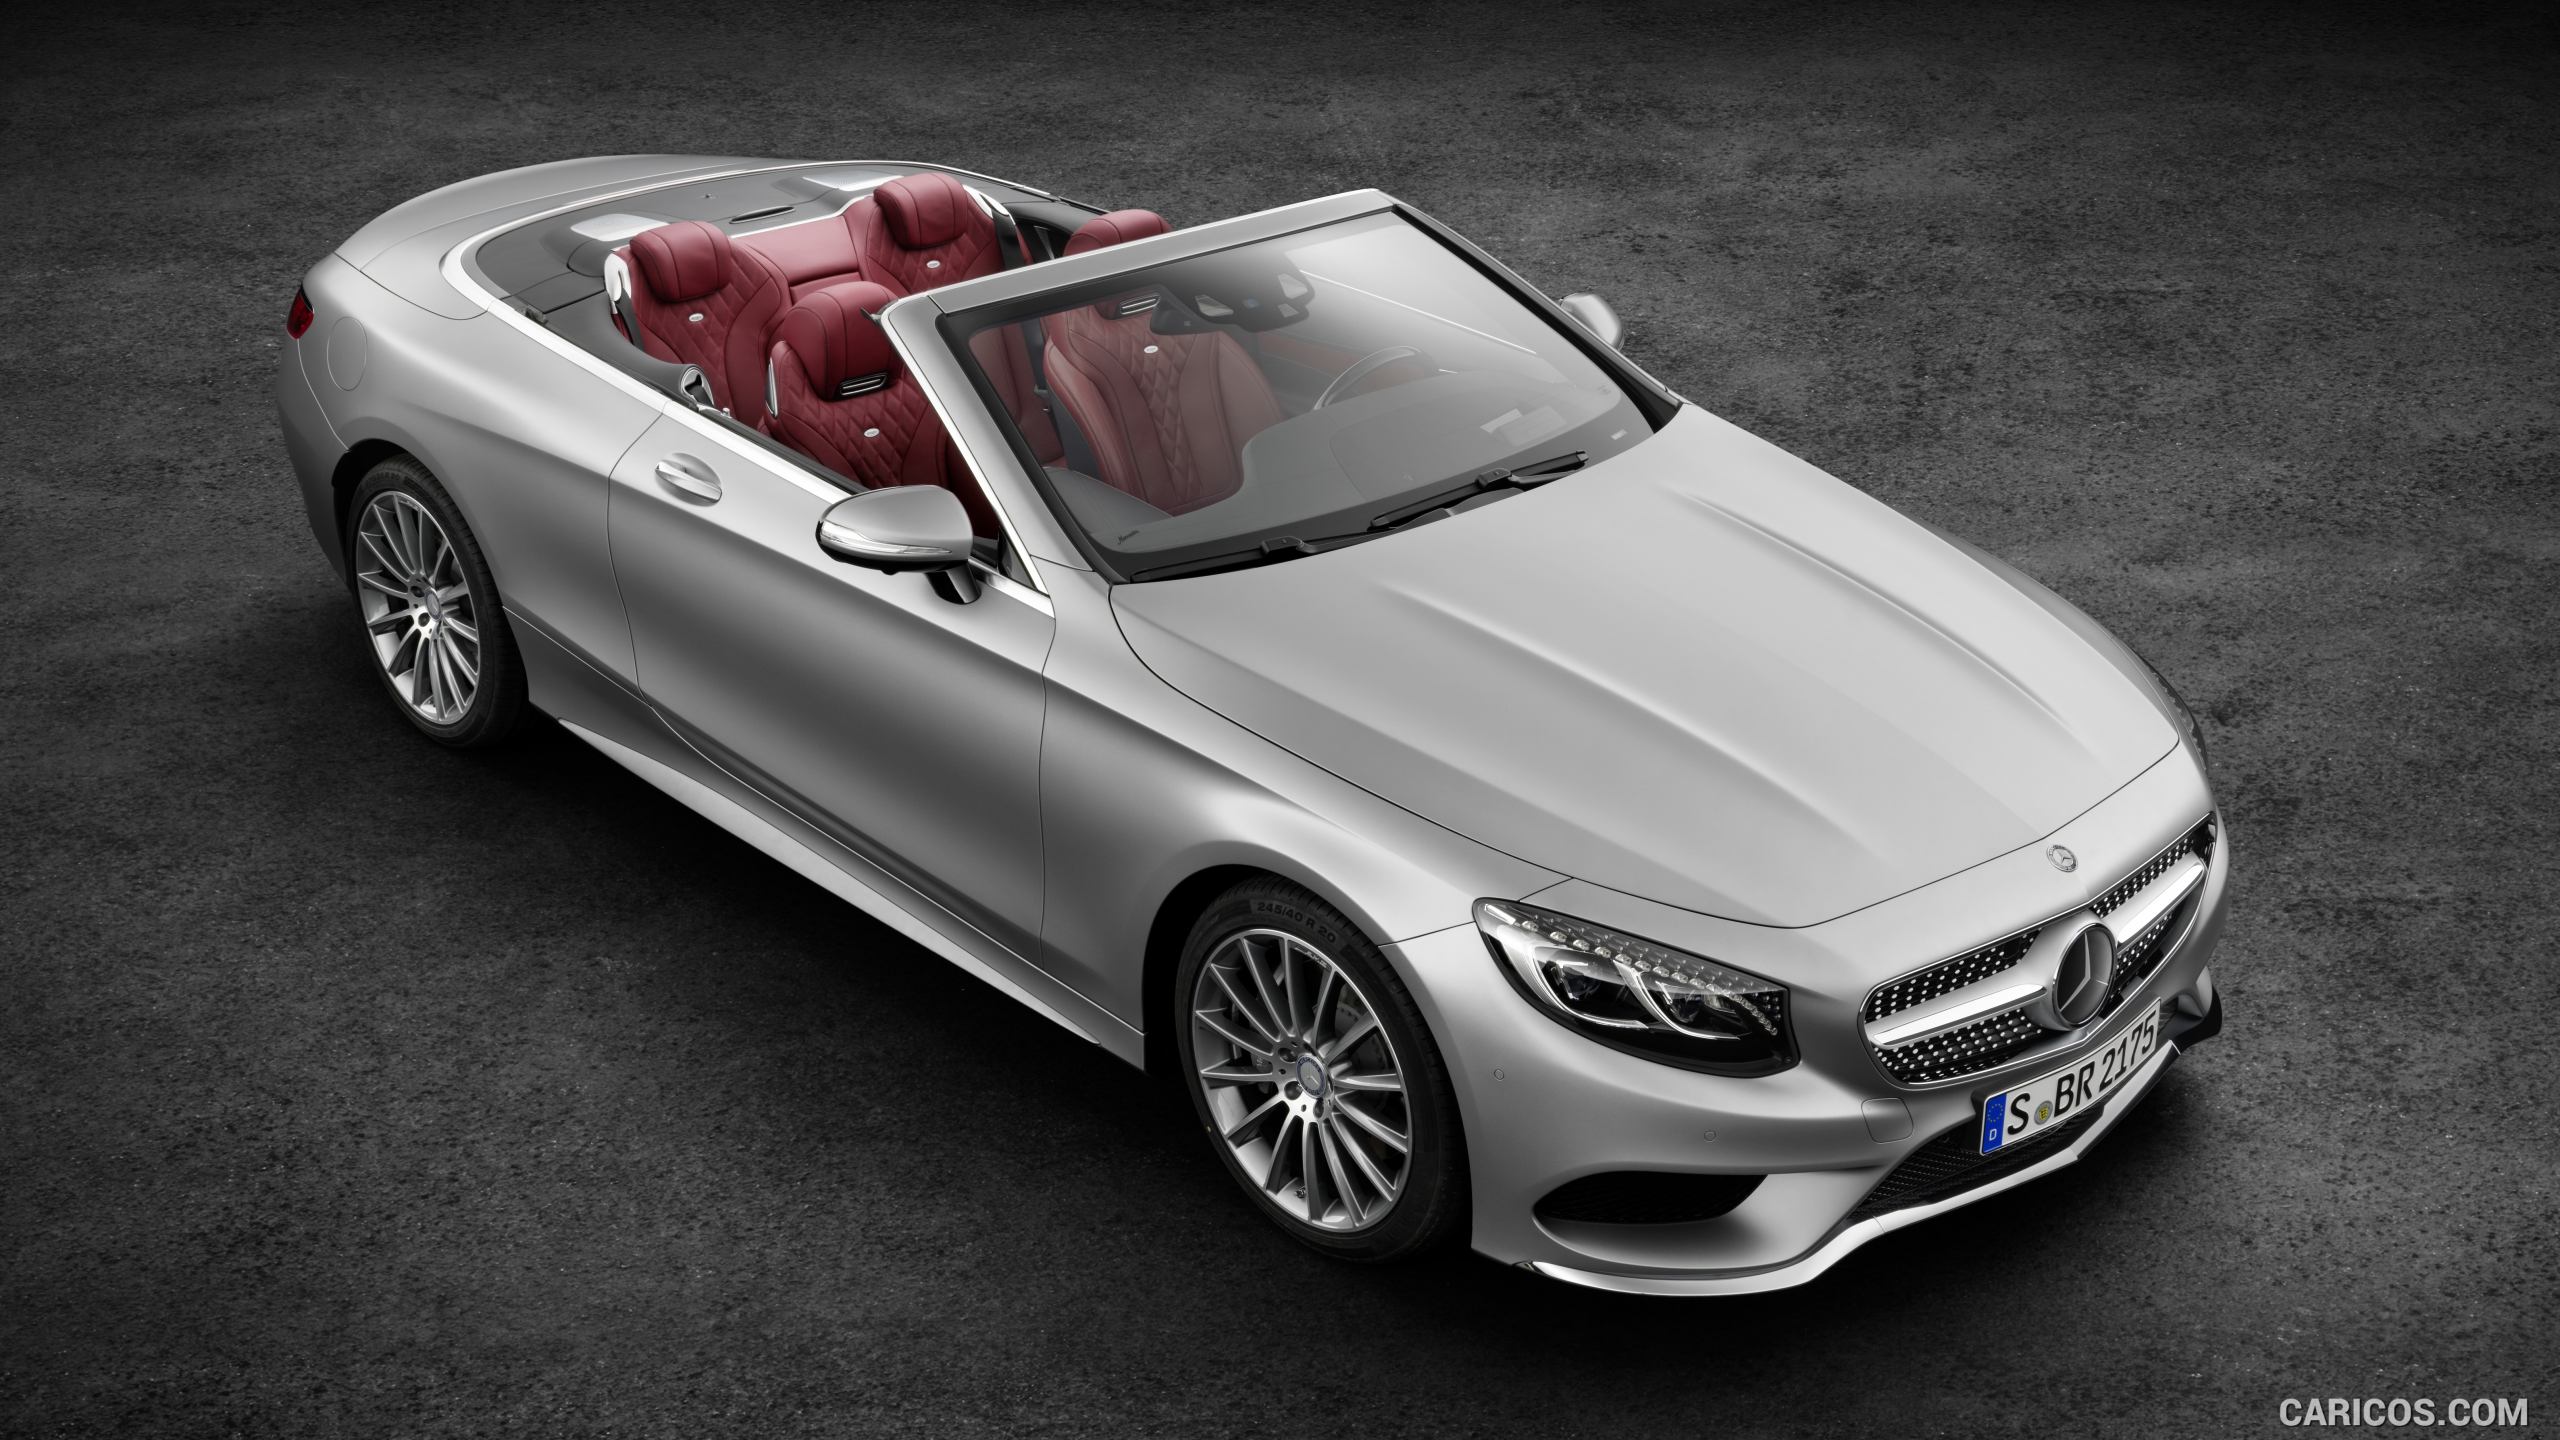 2017 Mercedes-Benz S-Class S500 Cabriolet AMG-line (Alanit Grey Magno) - Front, #23 of 56